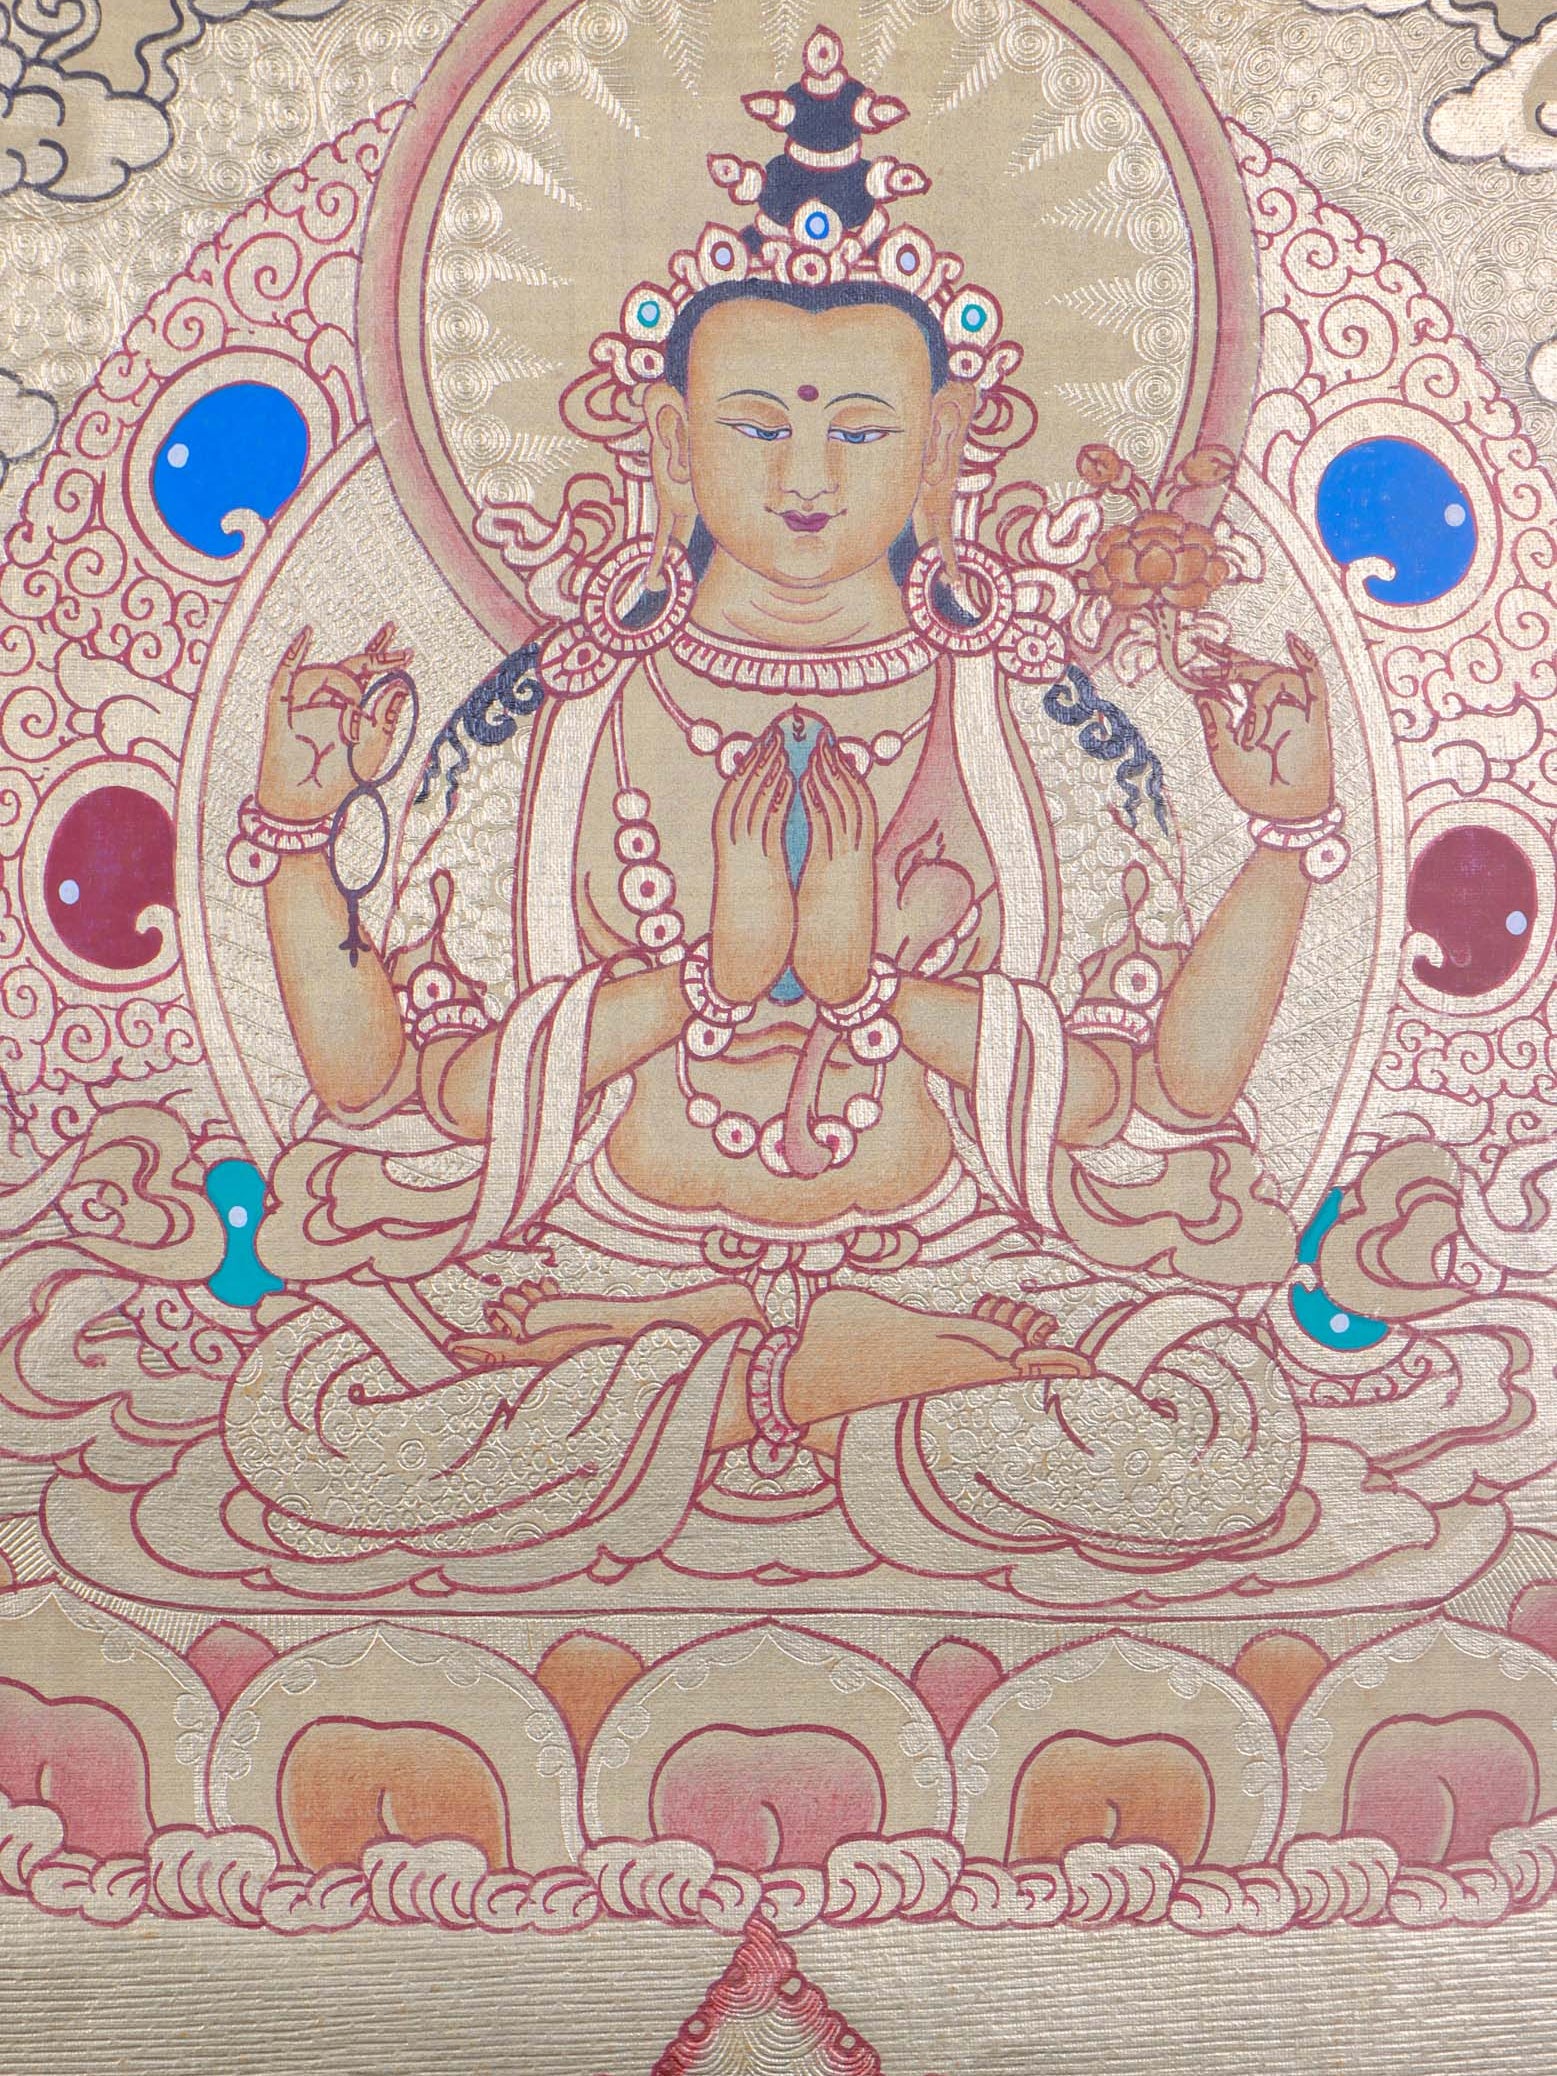 Golden Painting of 4 armed Chenrezig - Lucky Thanka